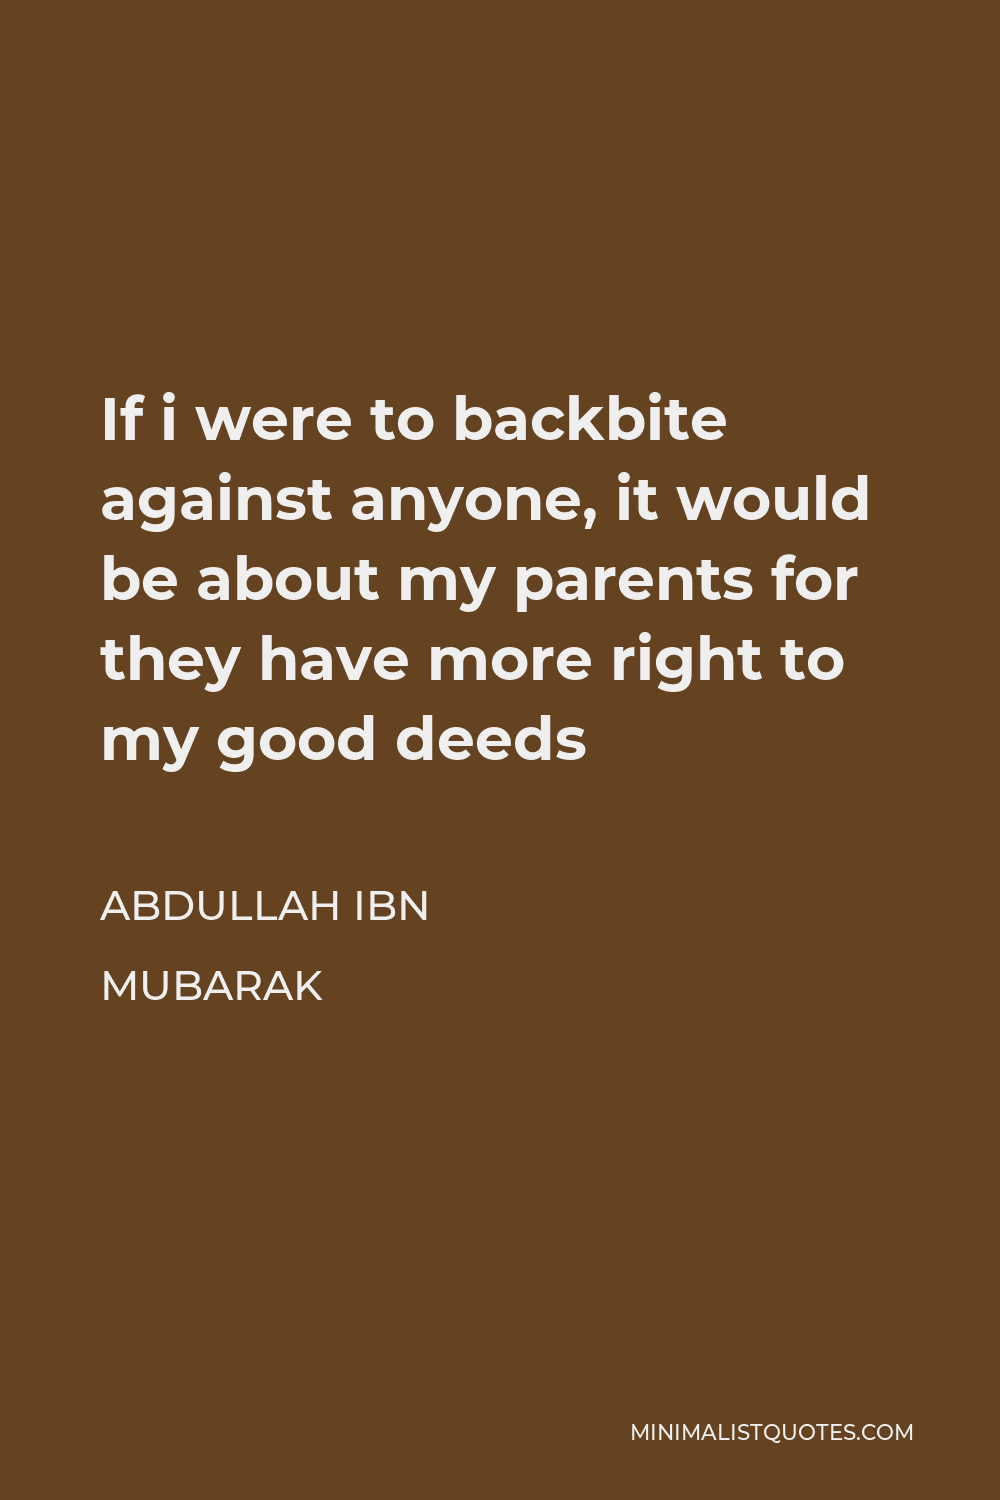 Abdullah ibn Mubarak Quote - If i were to backbite against anyone, it would be about my parents for they have more right to my good deeds